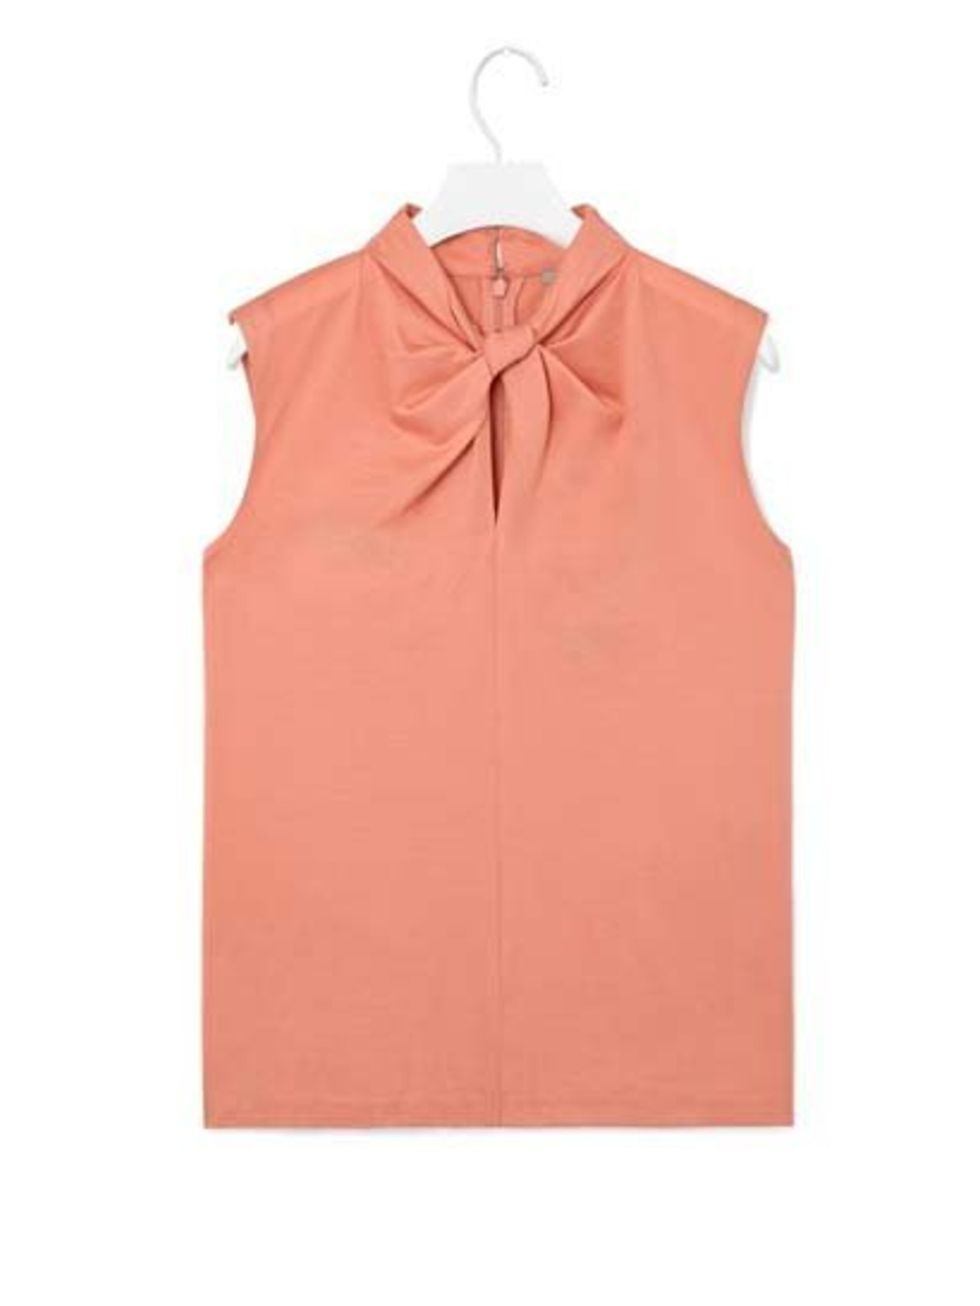 <p>A loose-fit for a relaxed silhouette, it has a stand-up collar and hidden zip fastening on the back. £35 at <a href="http://www.cosstores.com/gb/Shop/Women/Tops/Knot_neckline_top/46885-15098887.1">COS</a>.</p>